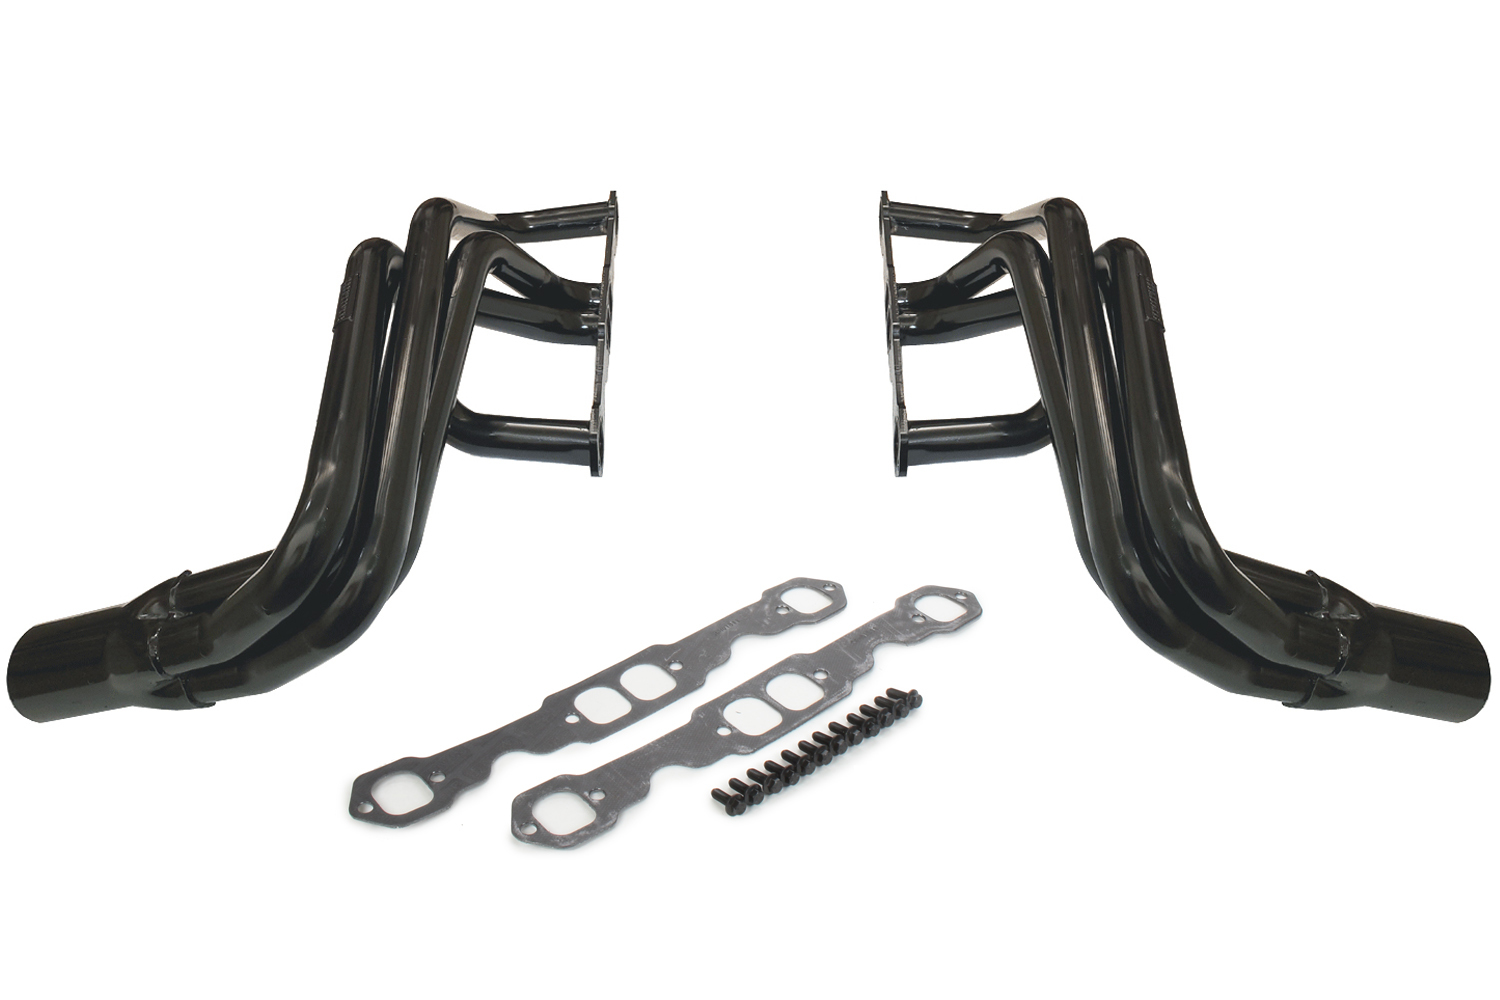 Schoenfeld Headers 198A - Headers, IMCA-UMP Stock Car, 1-3/4 in Primary, 3 in Collector, S-10 Forward Exit, Steel, Black Paint, Small Block Chevy, Kit